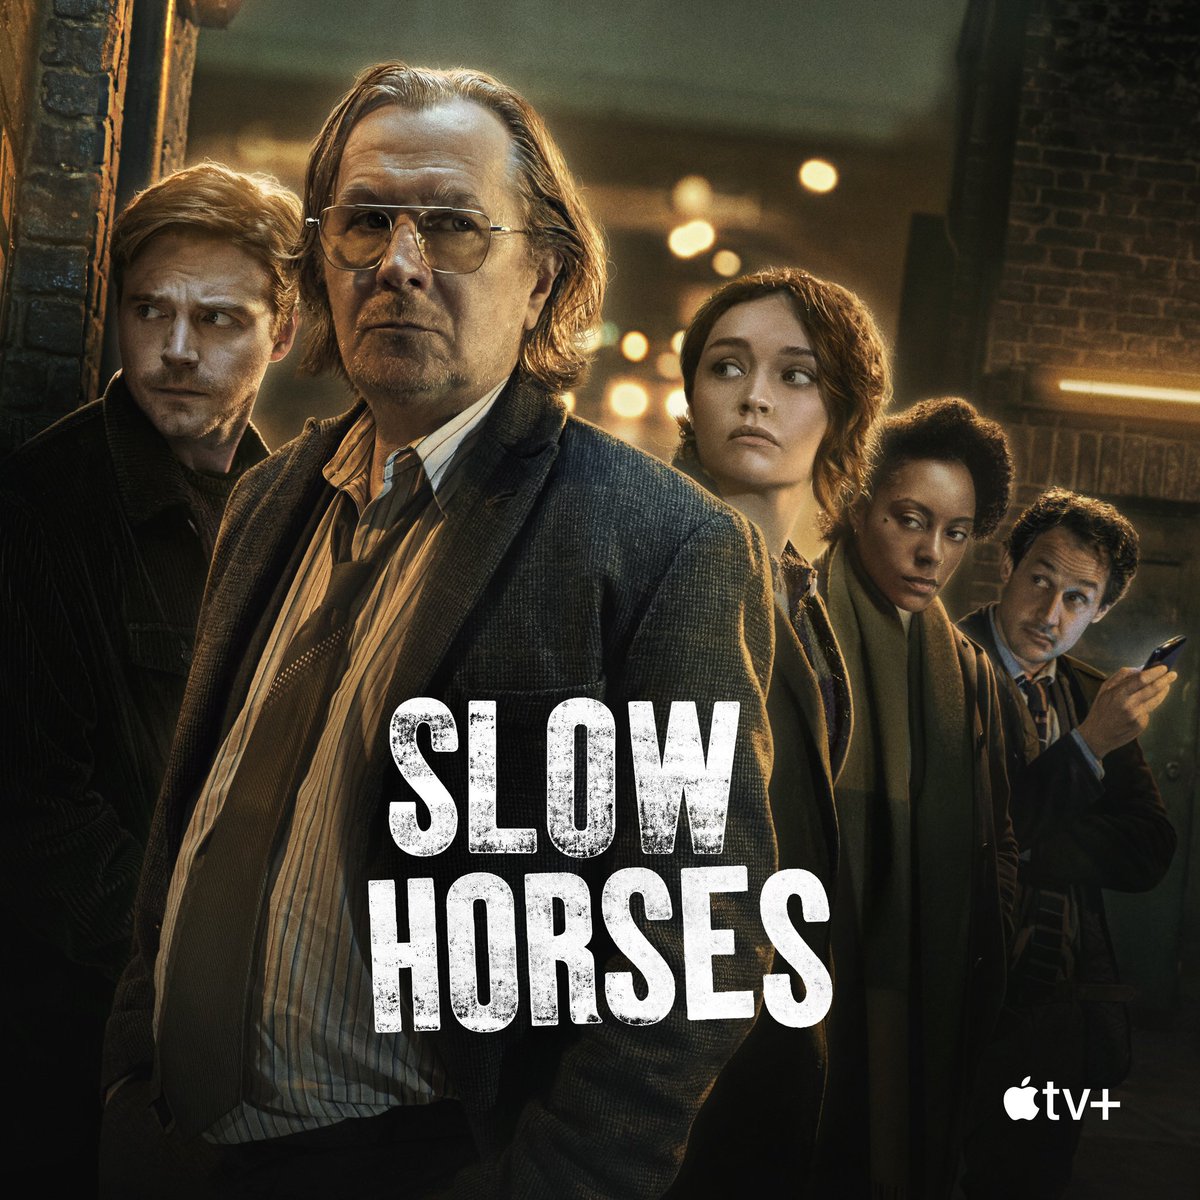 Was watching Slow Horses. Everything about this modern day espionage thriller is brilliant. Just finished season 1. #SlowHorses #GaryOldman #JackLowden #KristinScottThomas